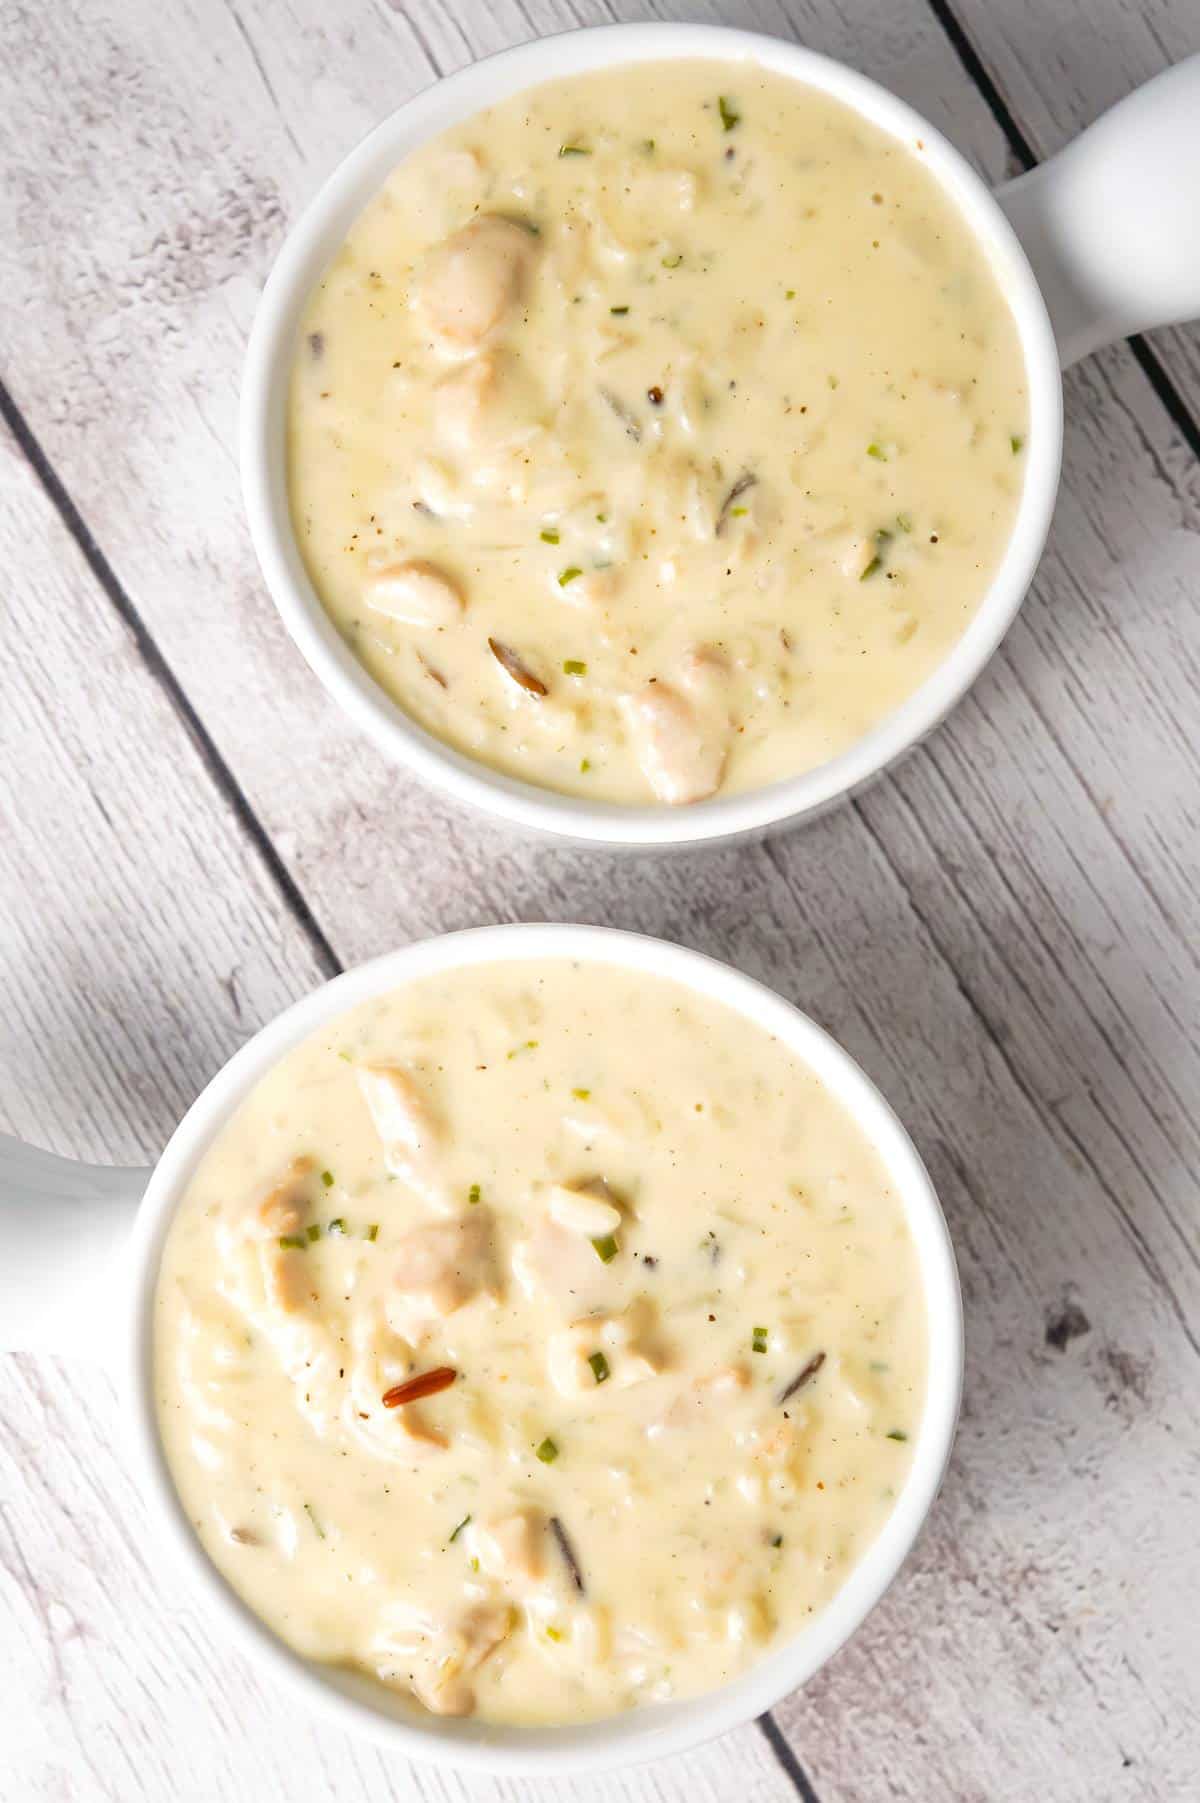 Instant Pot Chicken and Wild Rice Soup is a hearty, creamy soup recipe loaded with chunks of chicken and a long grain and wild rice blend.